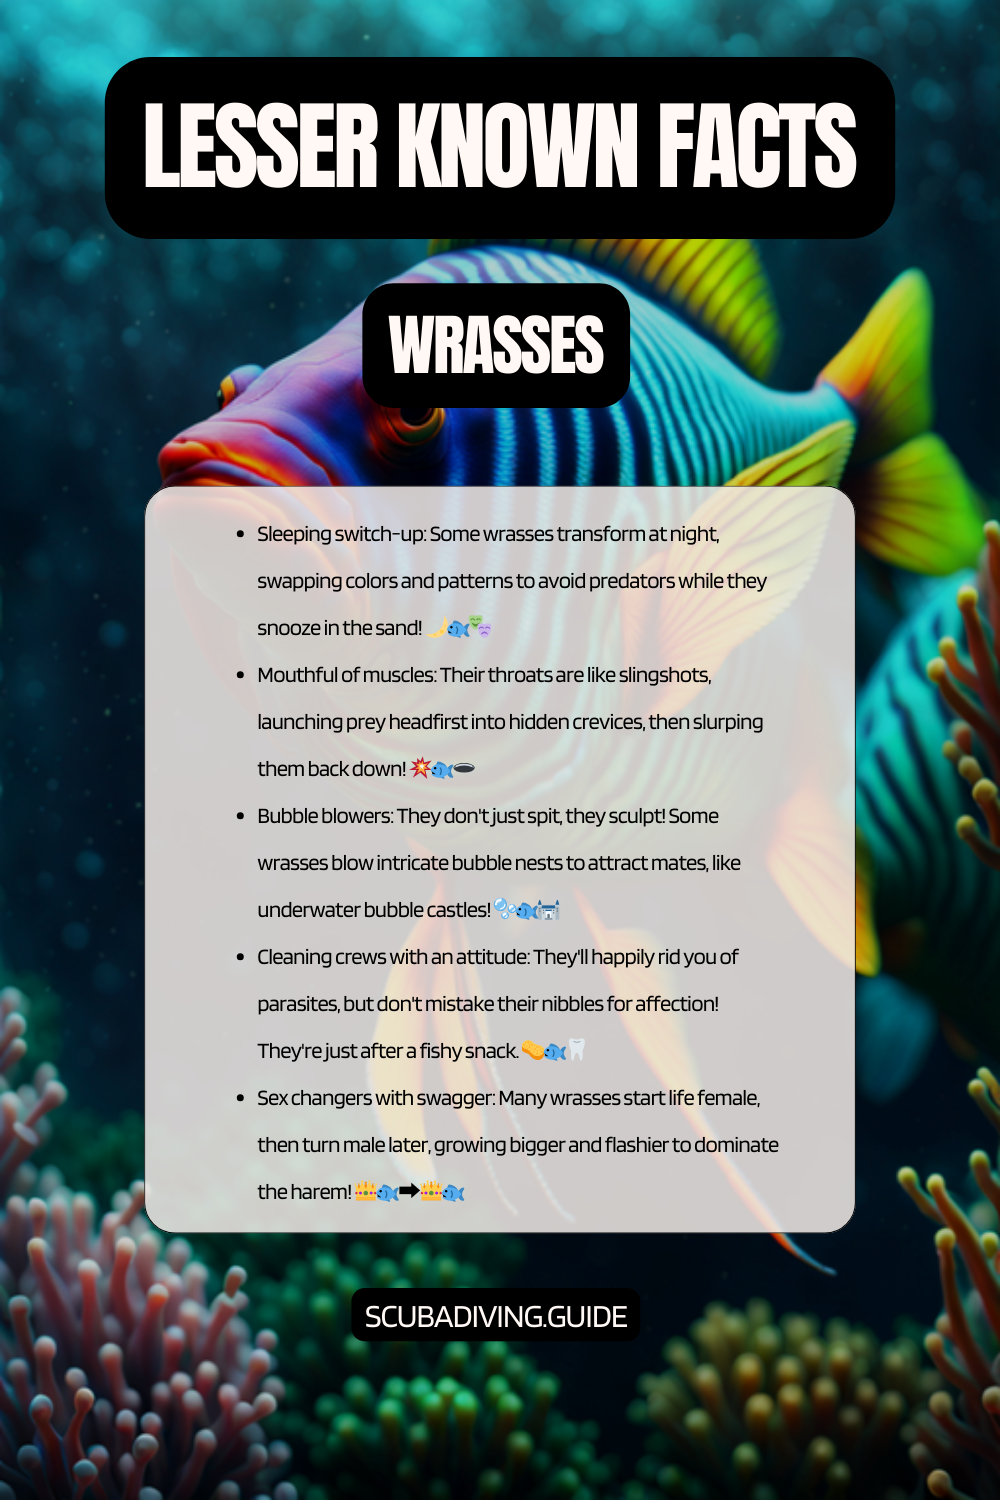 lesser known facts Wrasses